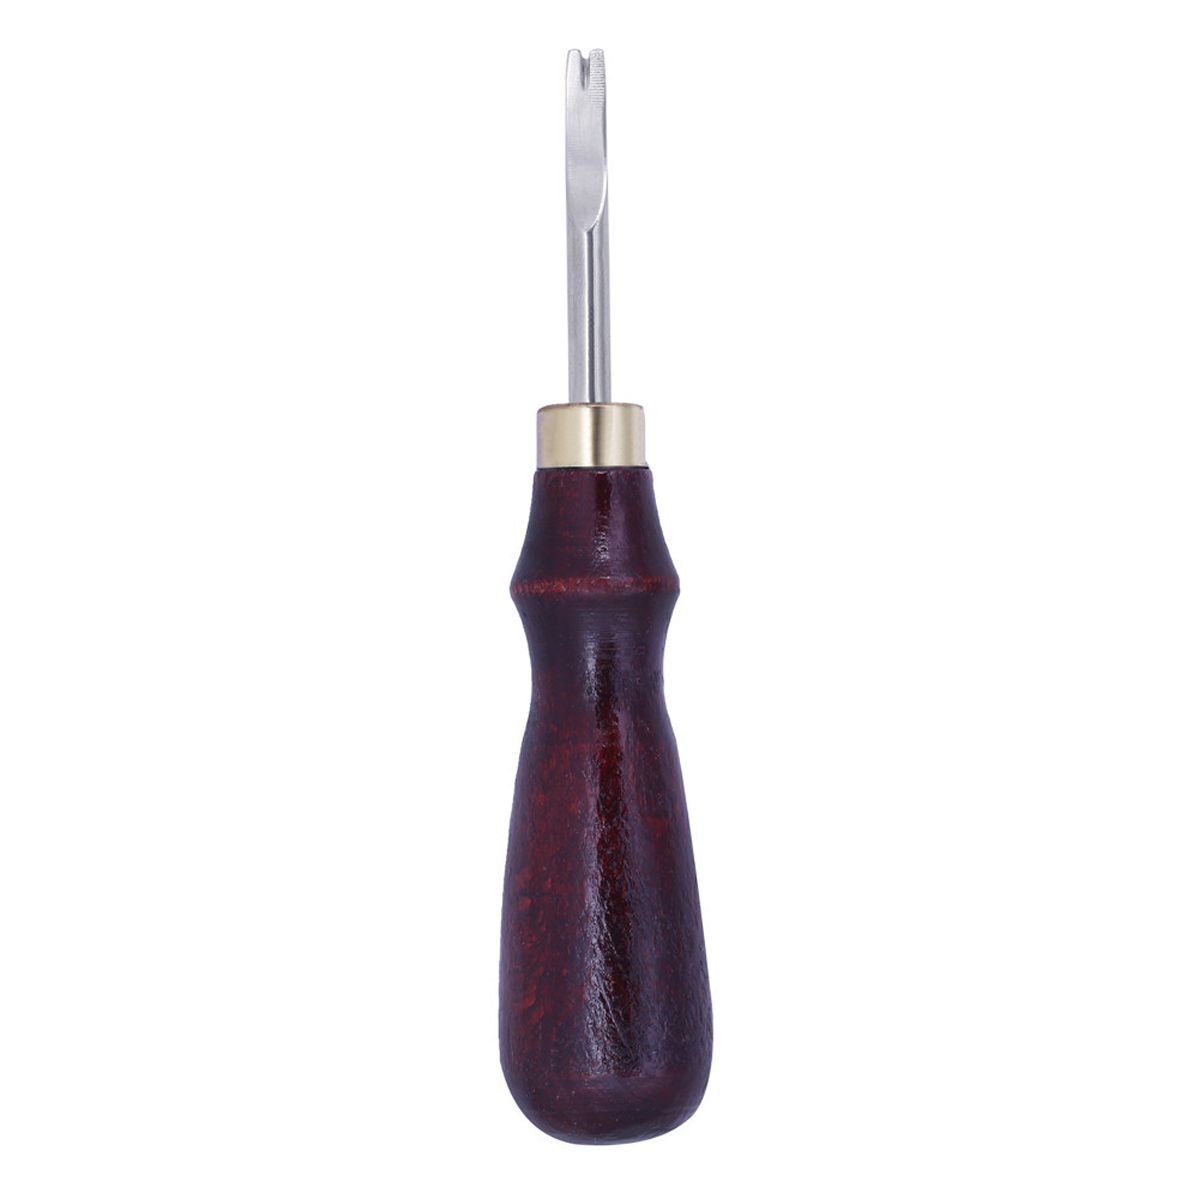 Professional-Handmade-Sewing-Leather-Craft-Tools-Kit-Punch-Stitching-Carving-1631675